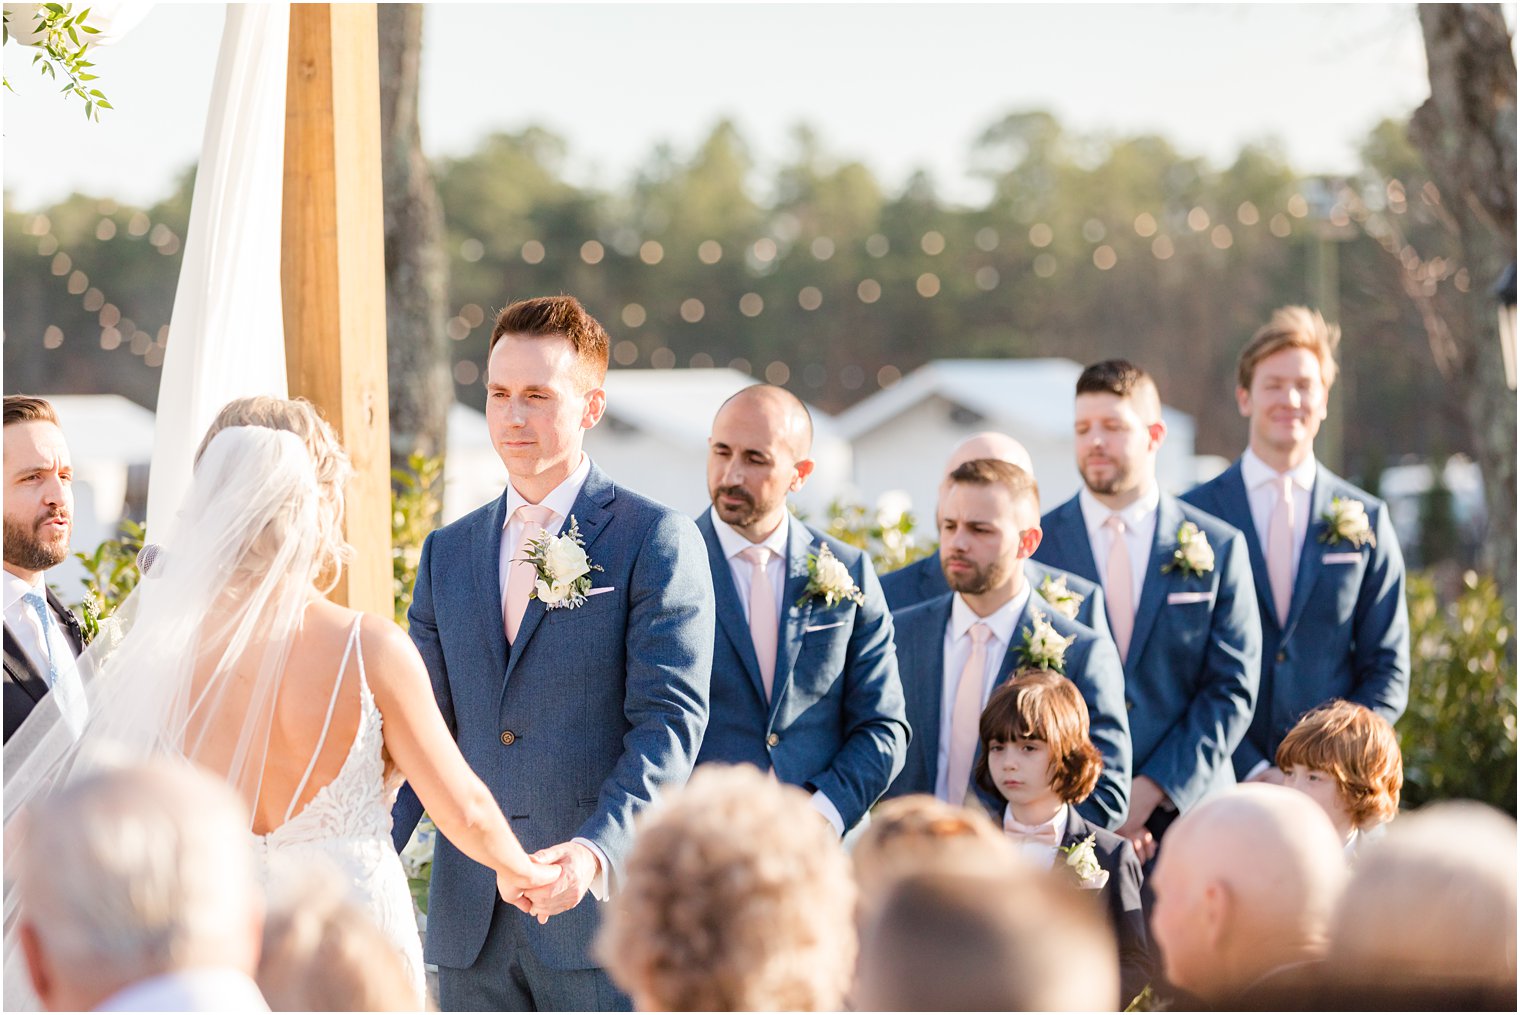 groom and groomsmen during outdoor ceremony at Renault Winery in Egg Harbor Township, NJ